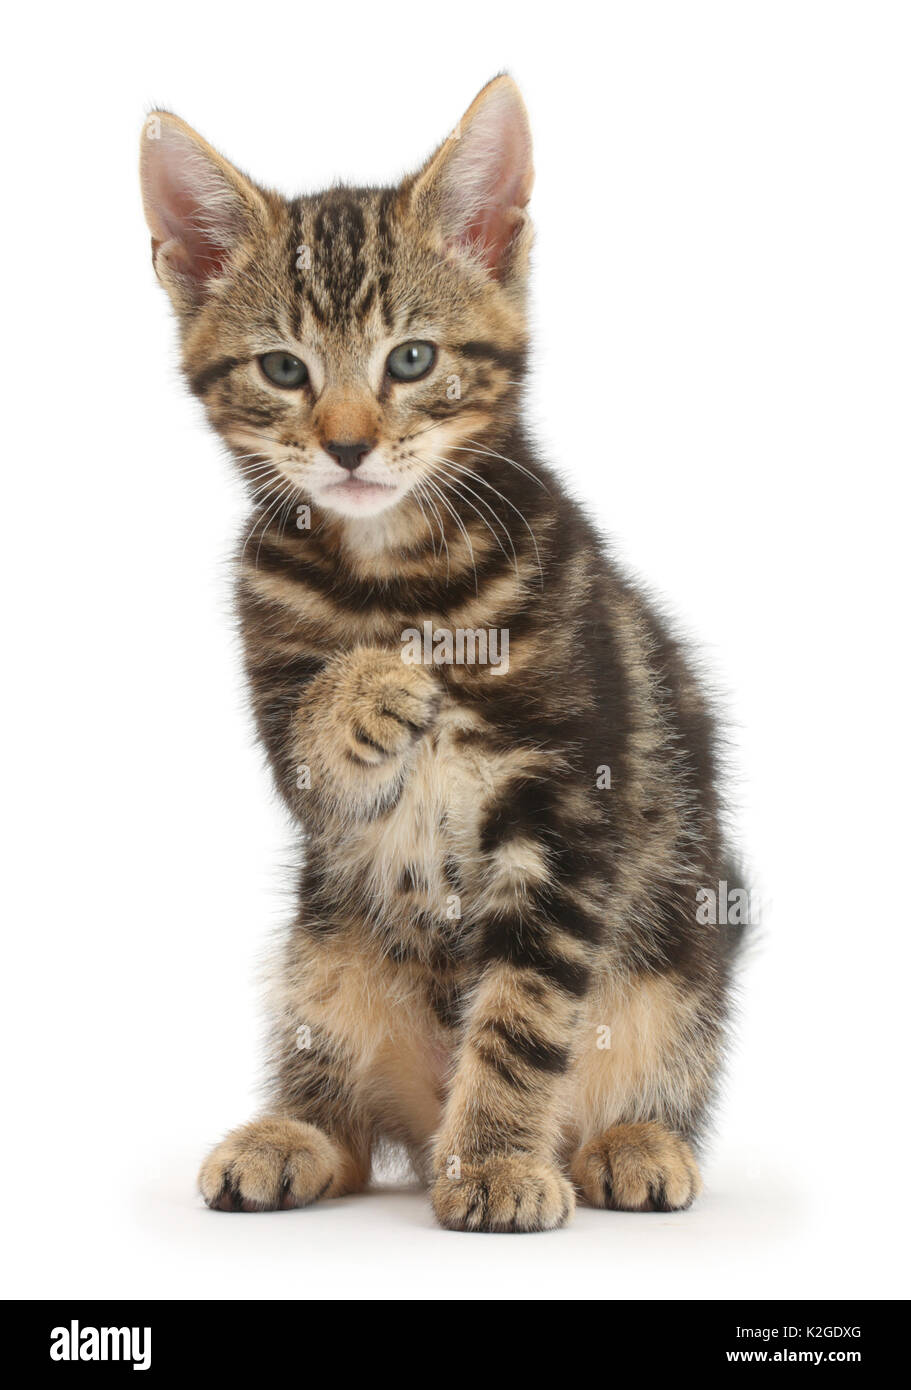 Tabby kitten, Picasso, 9 weeks, with raised paw. Stock Photo